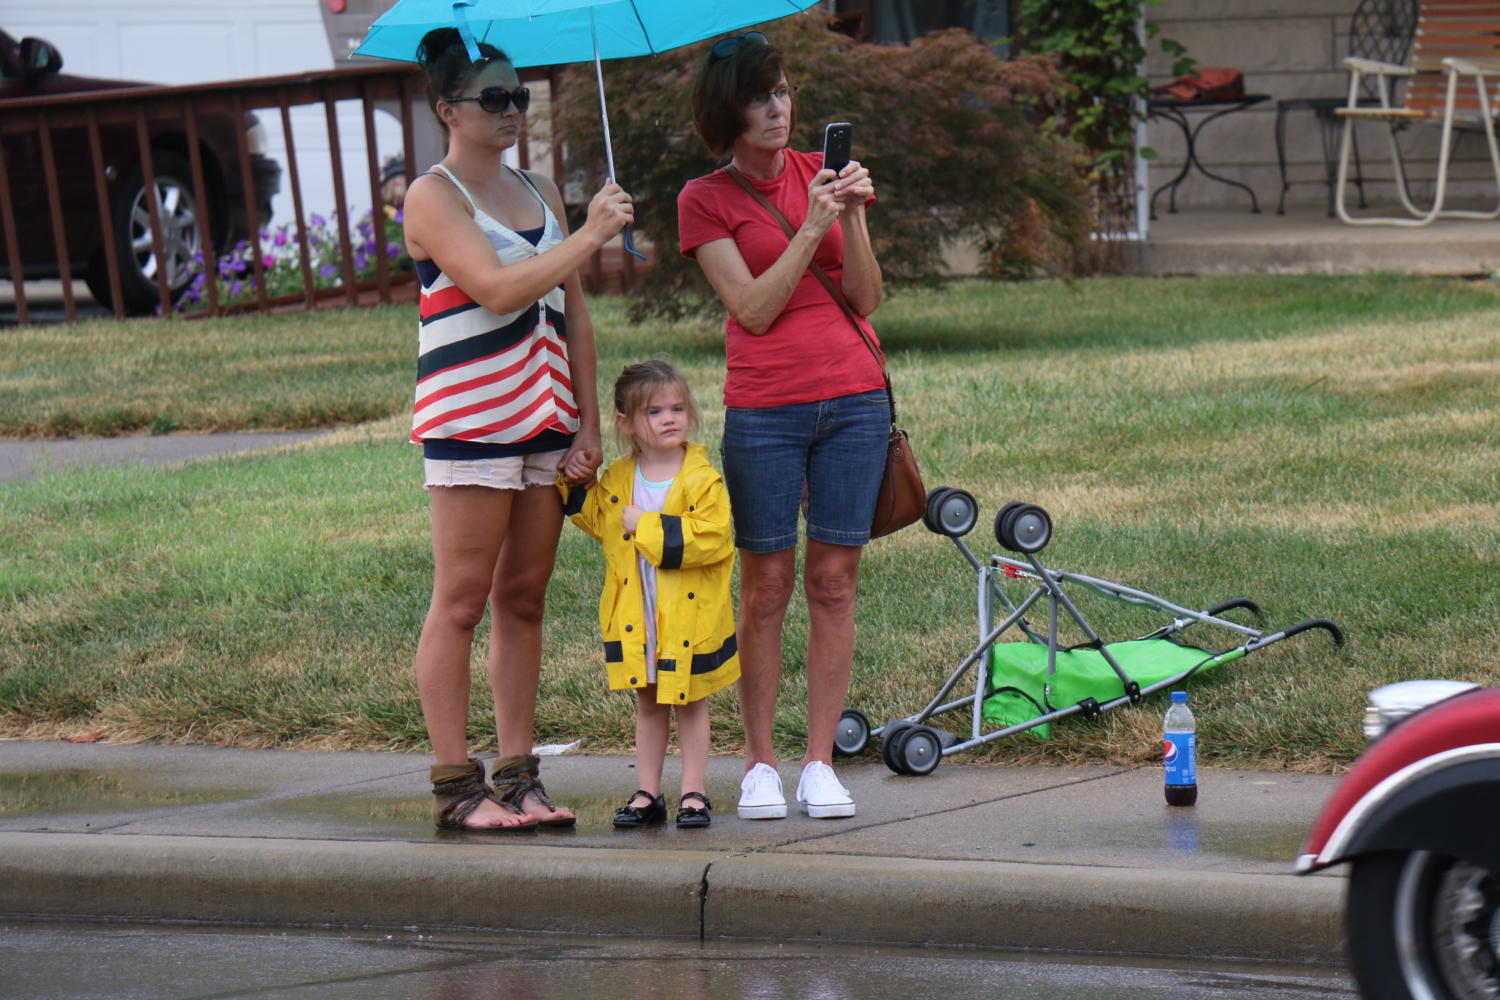 Community members shelter under an umbrella as Sgt. Hunters procession passes.